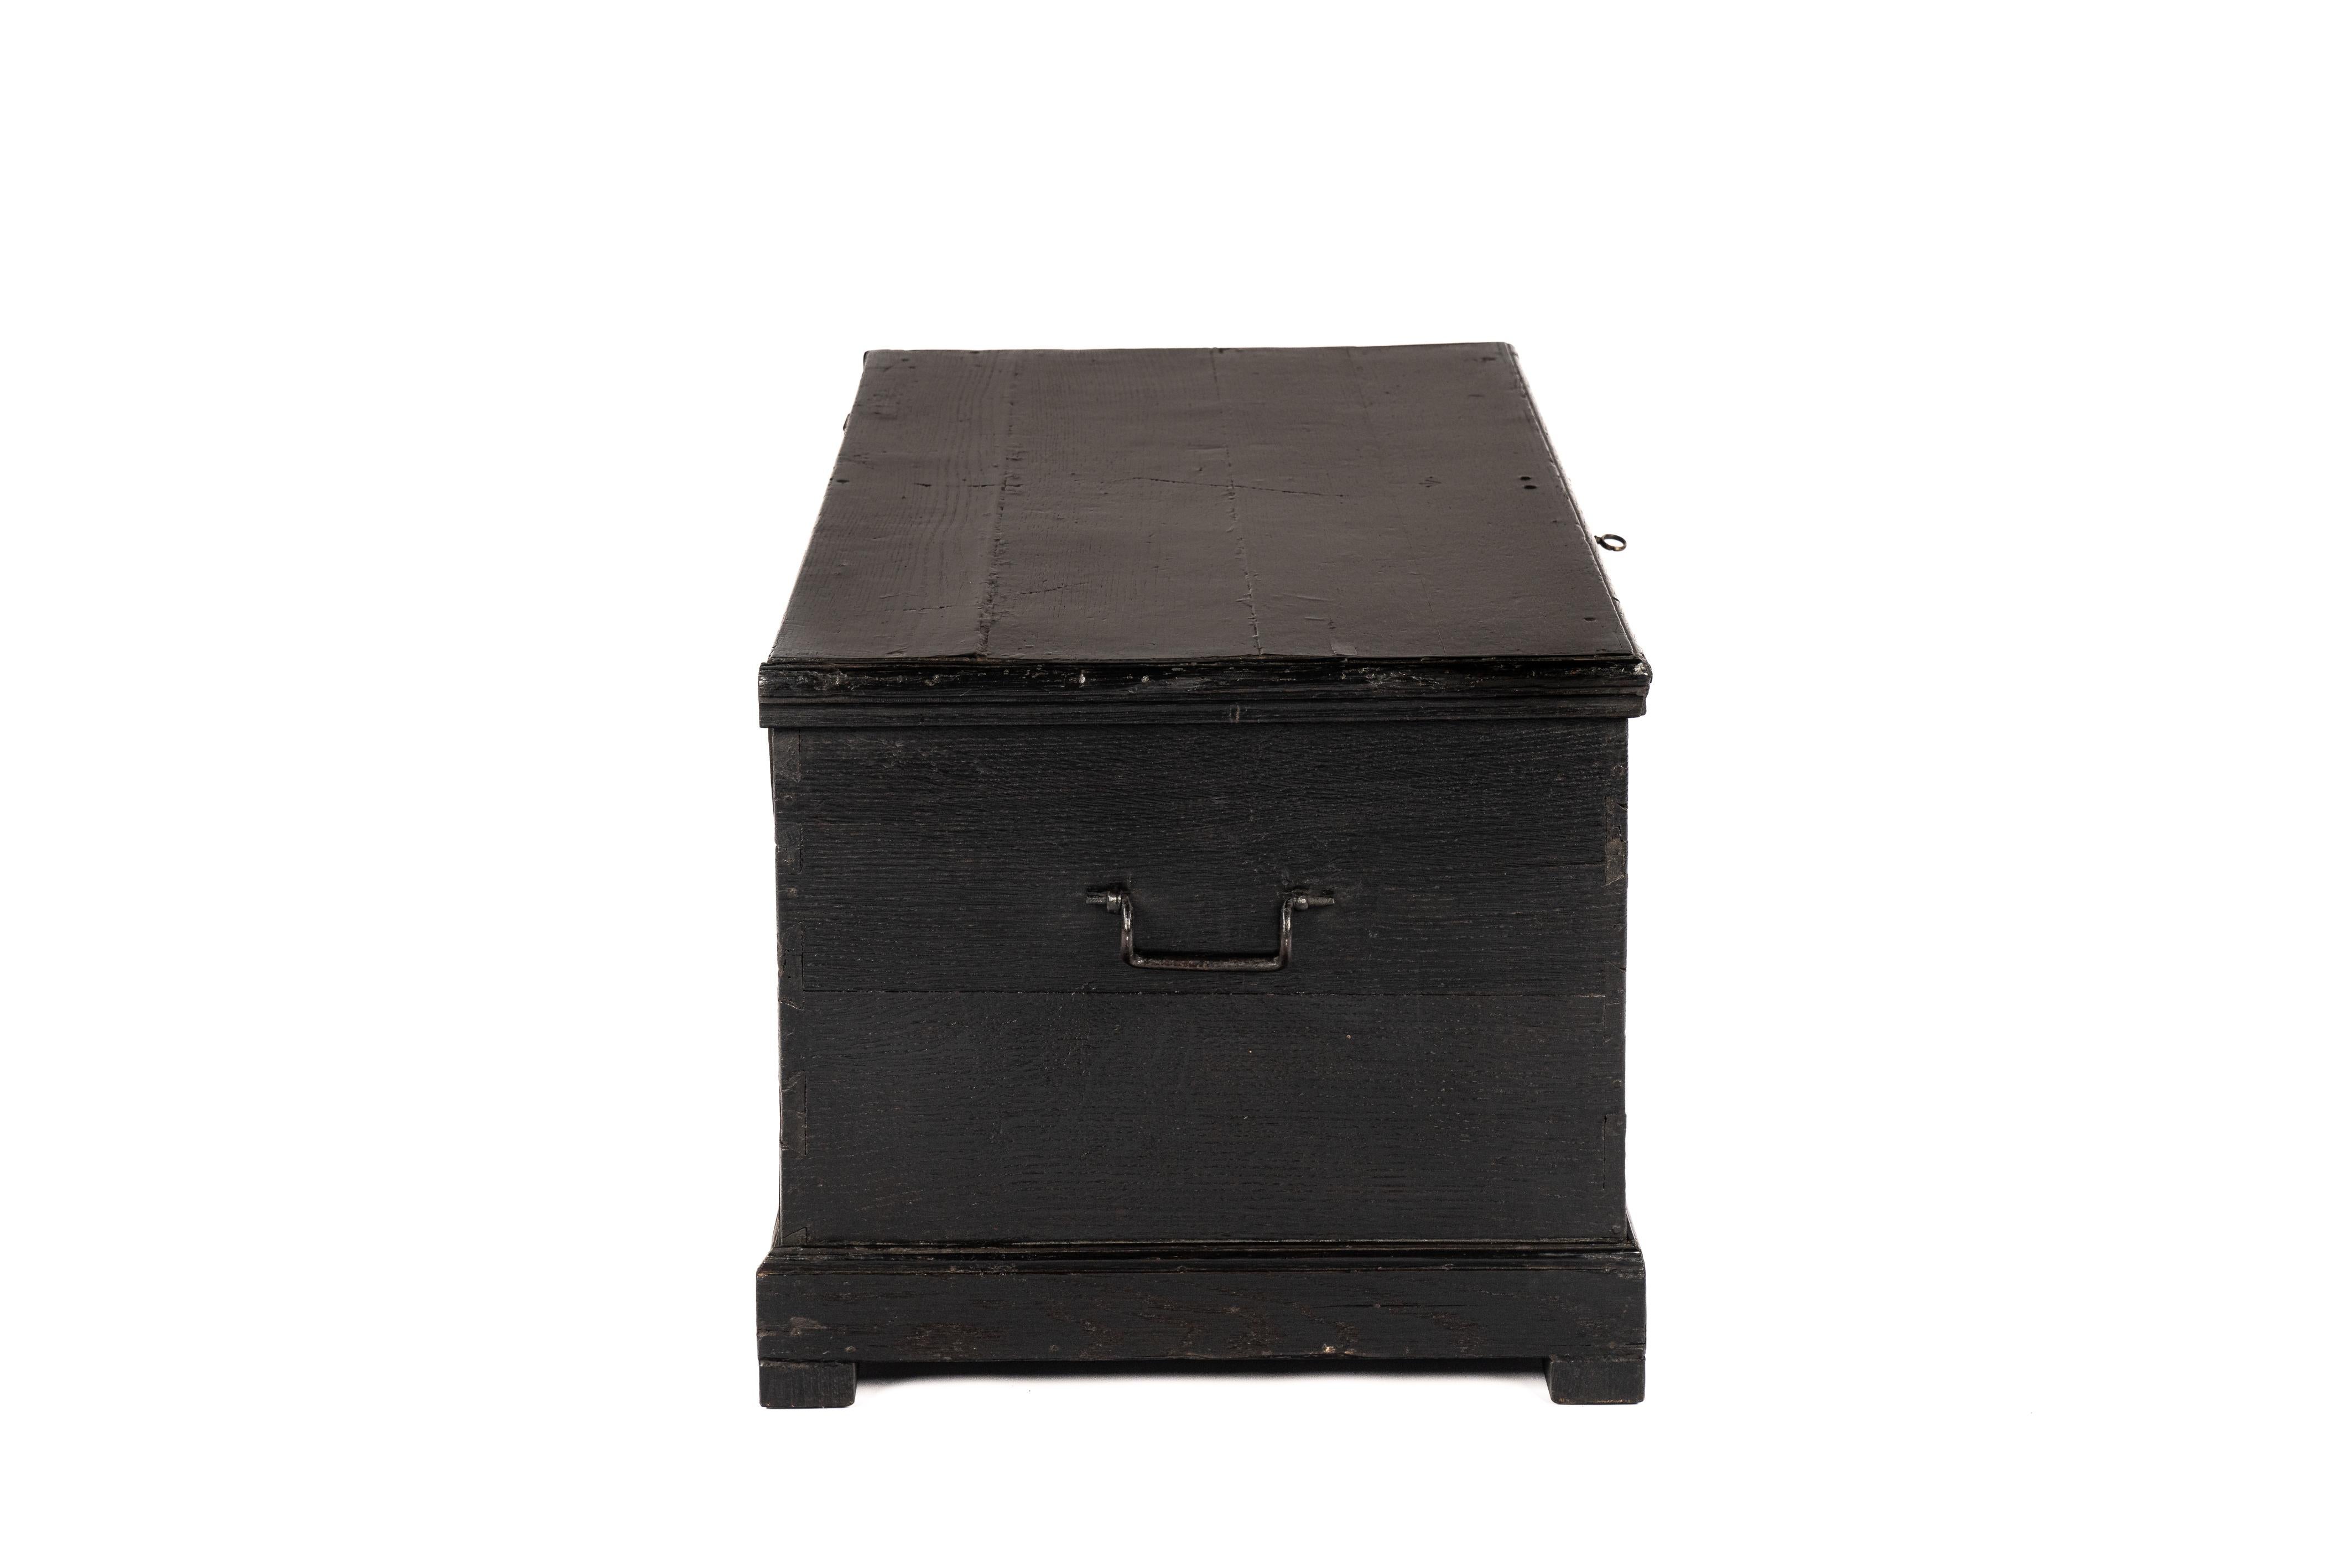 19th Century Antique 19th-century West German black oak blanket chest trunk or coffer For Sale